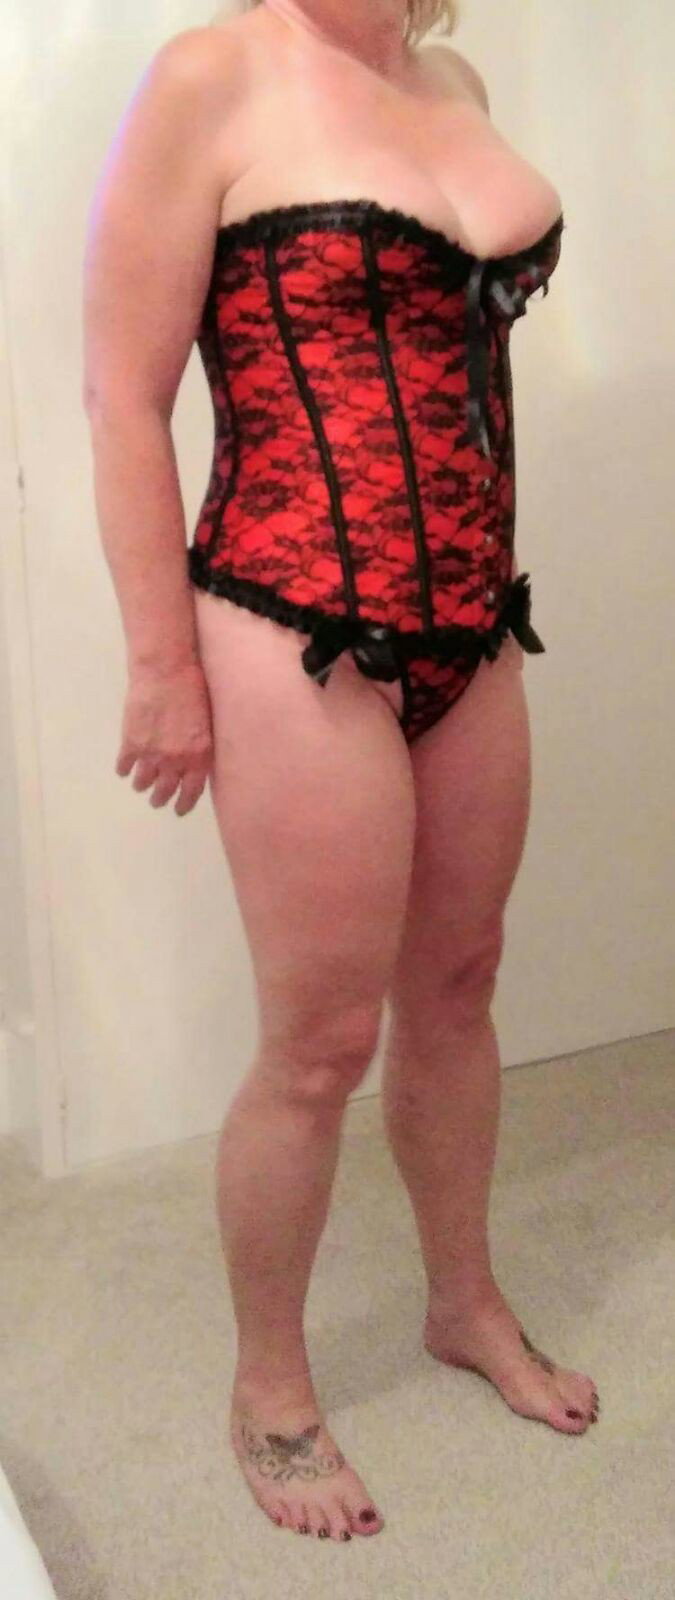 Photo by Mr. & Mrs. B with the username @Dickieboy07, who is a verified user,  December 1, 2020 at 9:08 PM and the text says 'Thank you for all the likes, comments and share we get, the more we get the more we'll post

#hotwife #hotgirl #milf #gilf #cougar #vixen #wife #married #nan #gran #couple #tattoo #tattoos #stag #mature #MFM #mfm #MMF #mmf #threesome #moresome #lingerie..'